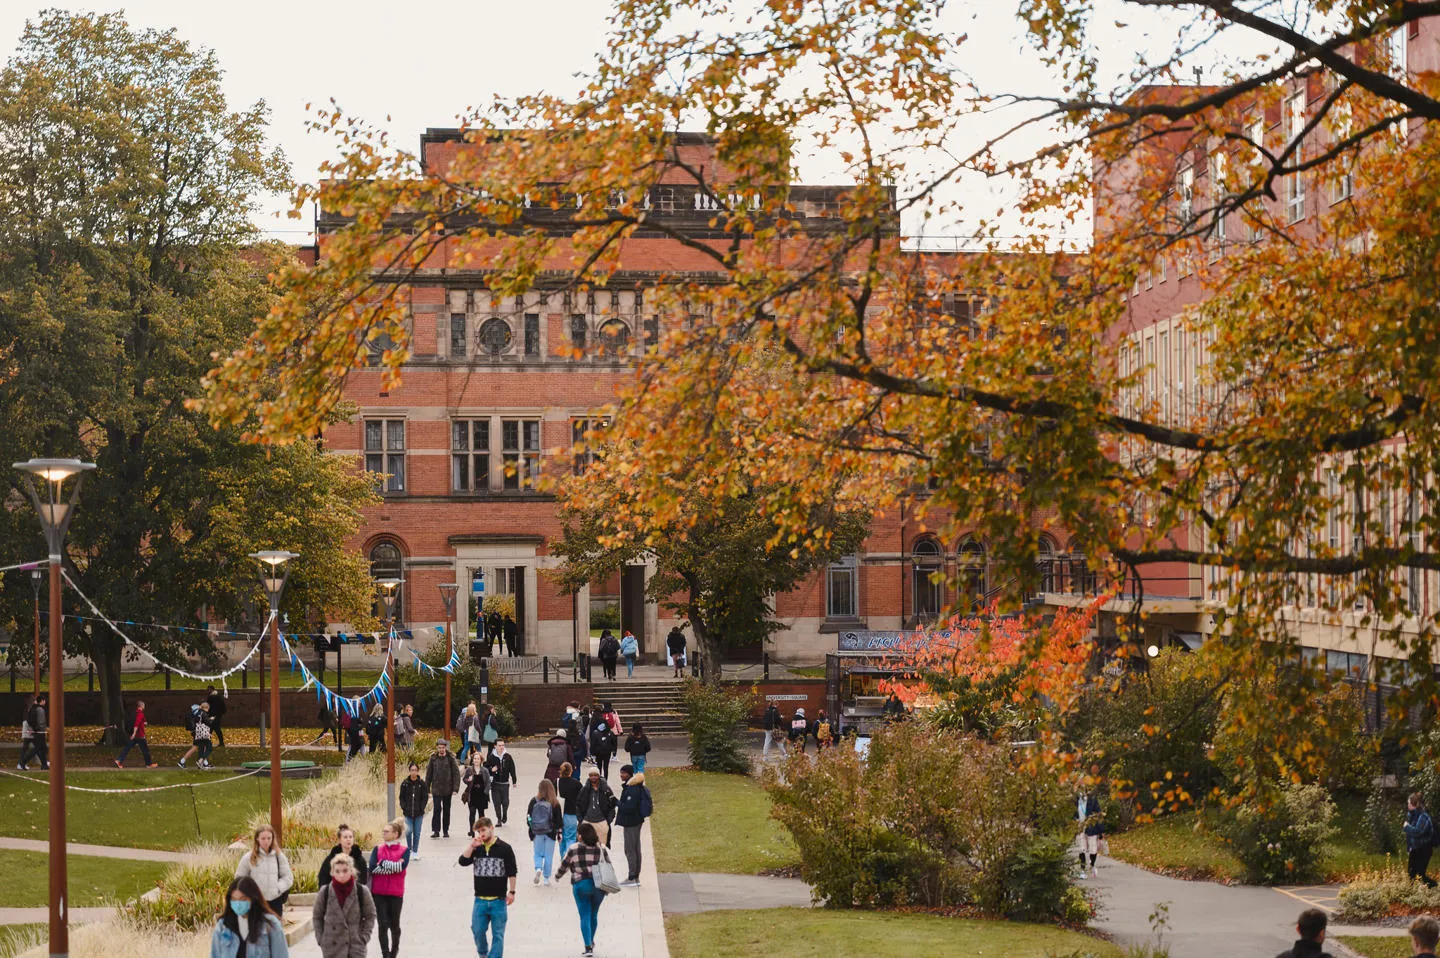 University of Birmingham campus - group of people walking through green space. Red brick large building to the rear